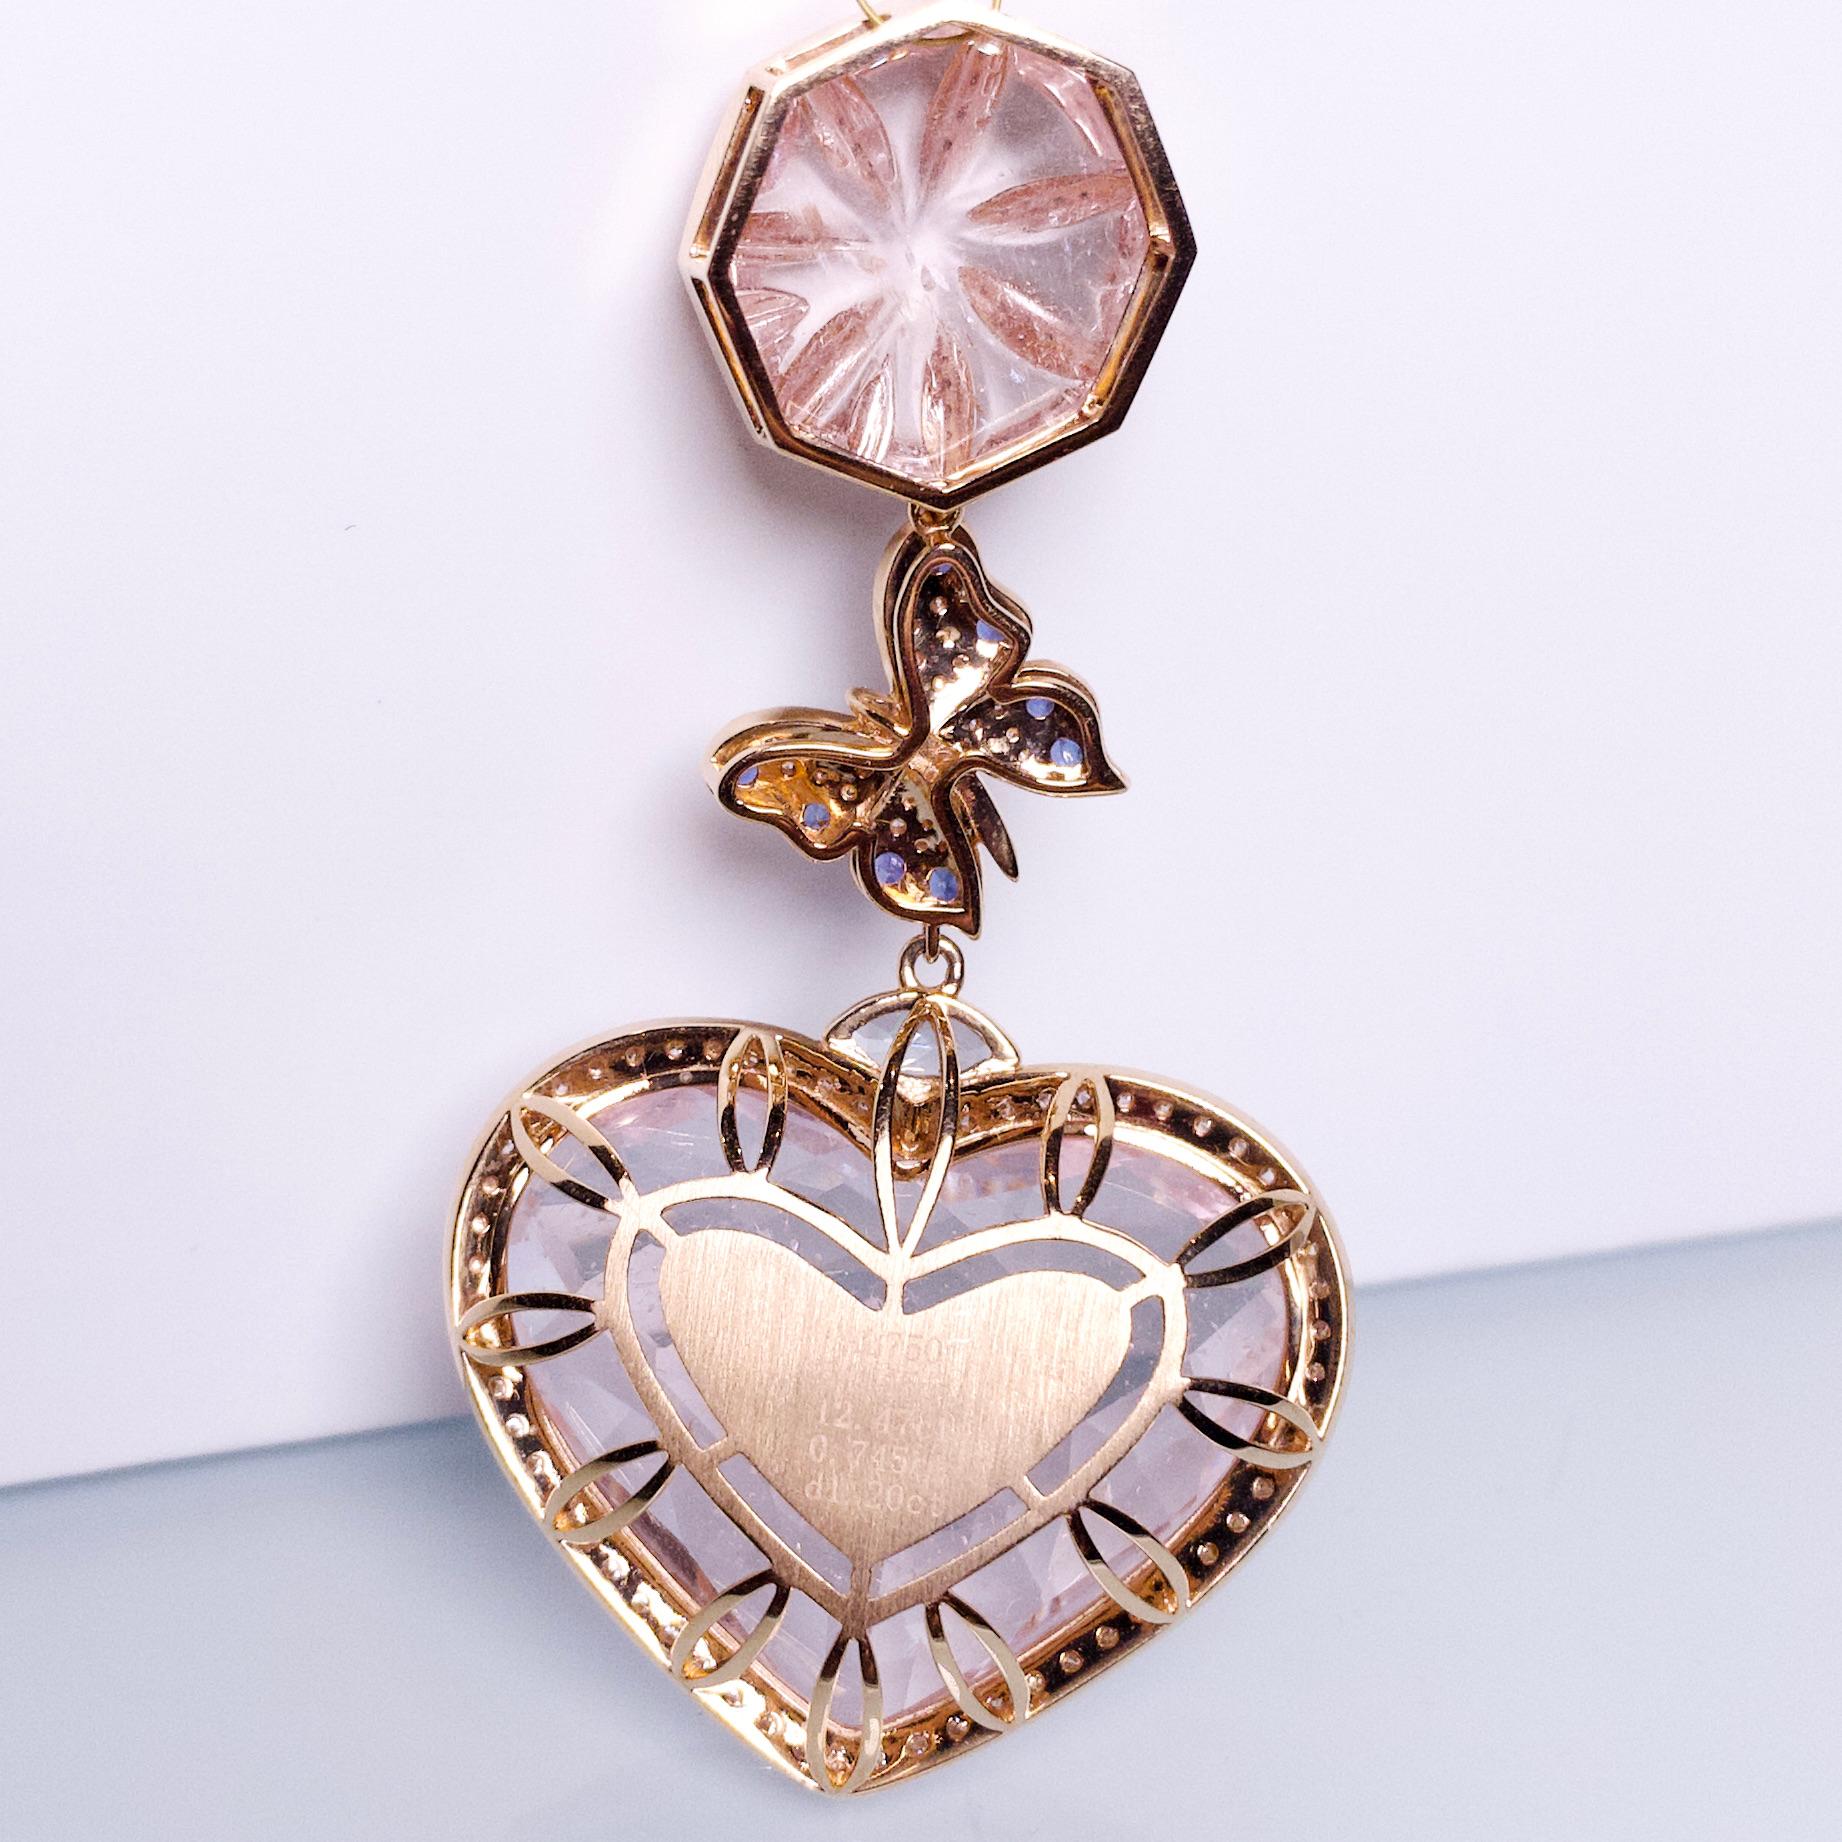 This is a massive statement pendant as it consists of a 54 ct Heart shape Morganite and a 12 ct Morganite cabochon. The Heart Shape Morganite is surrounded by diamond pave and is suspended below a butterfly motif encrusted in Diamonds and Blue